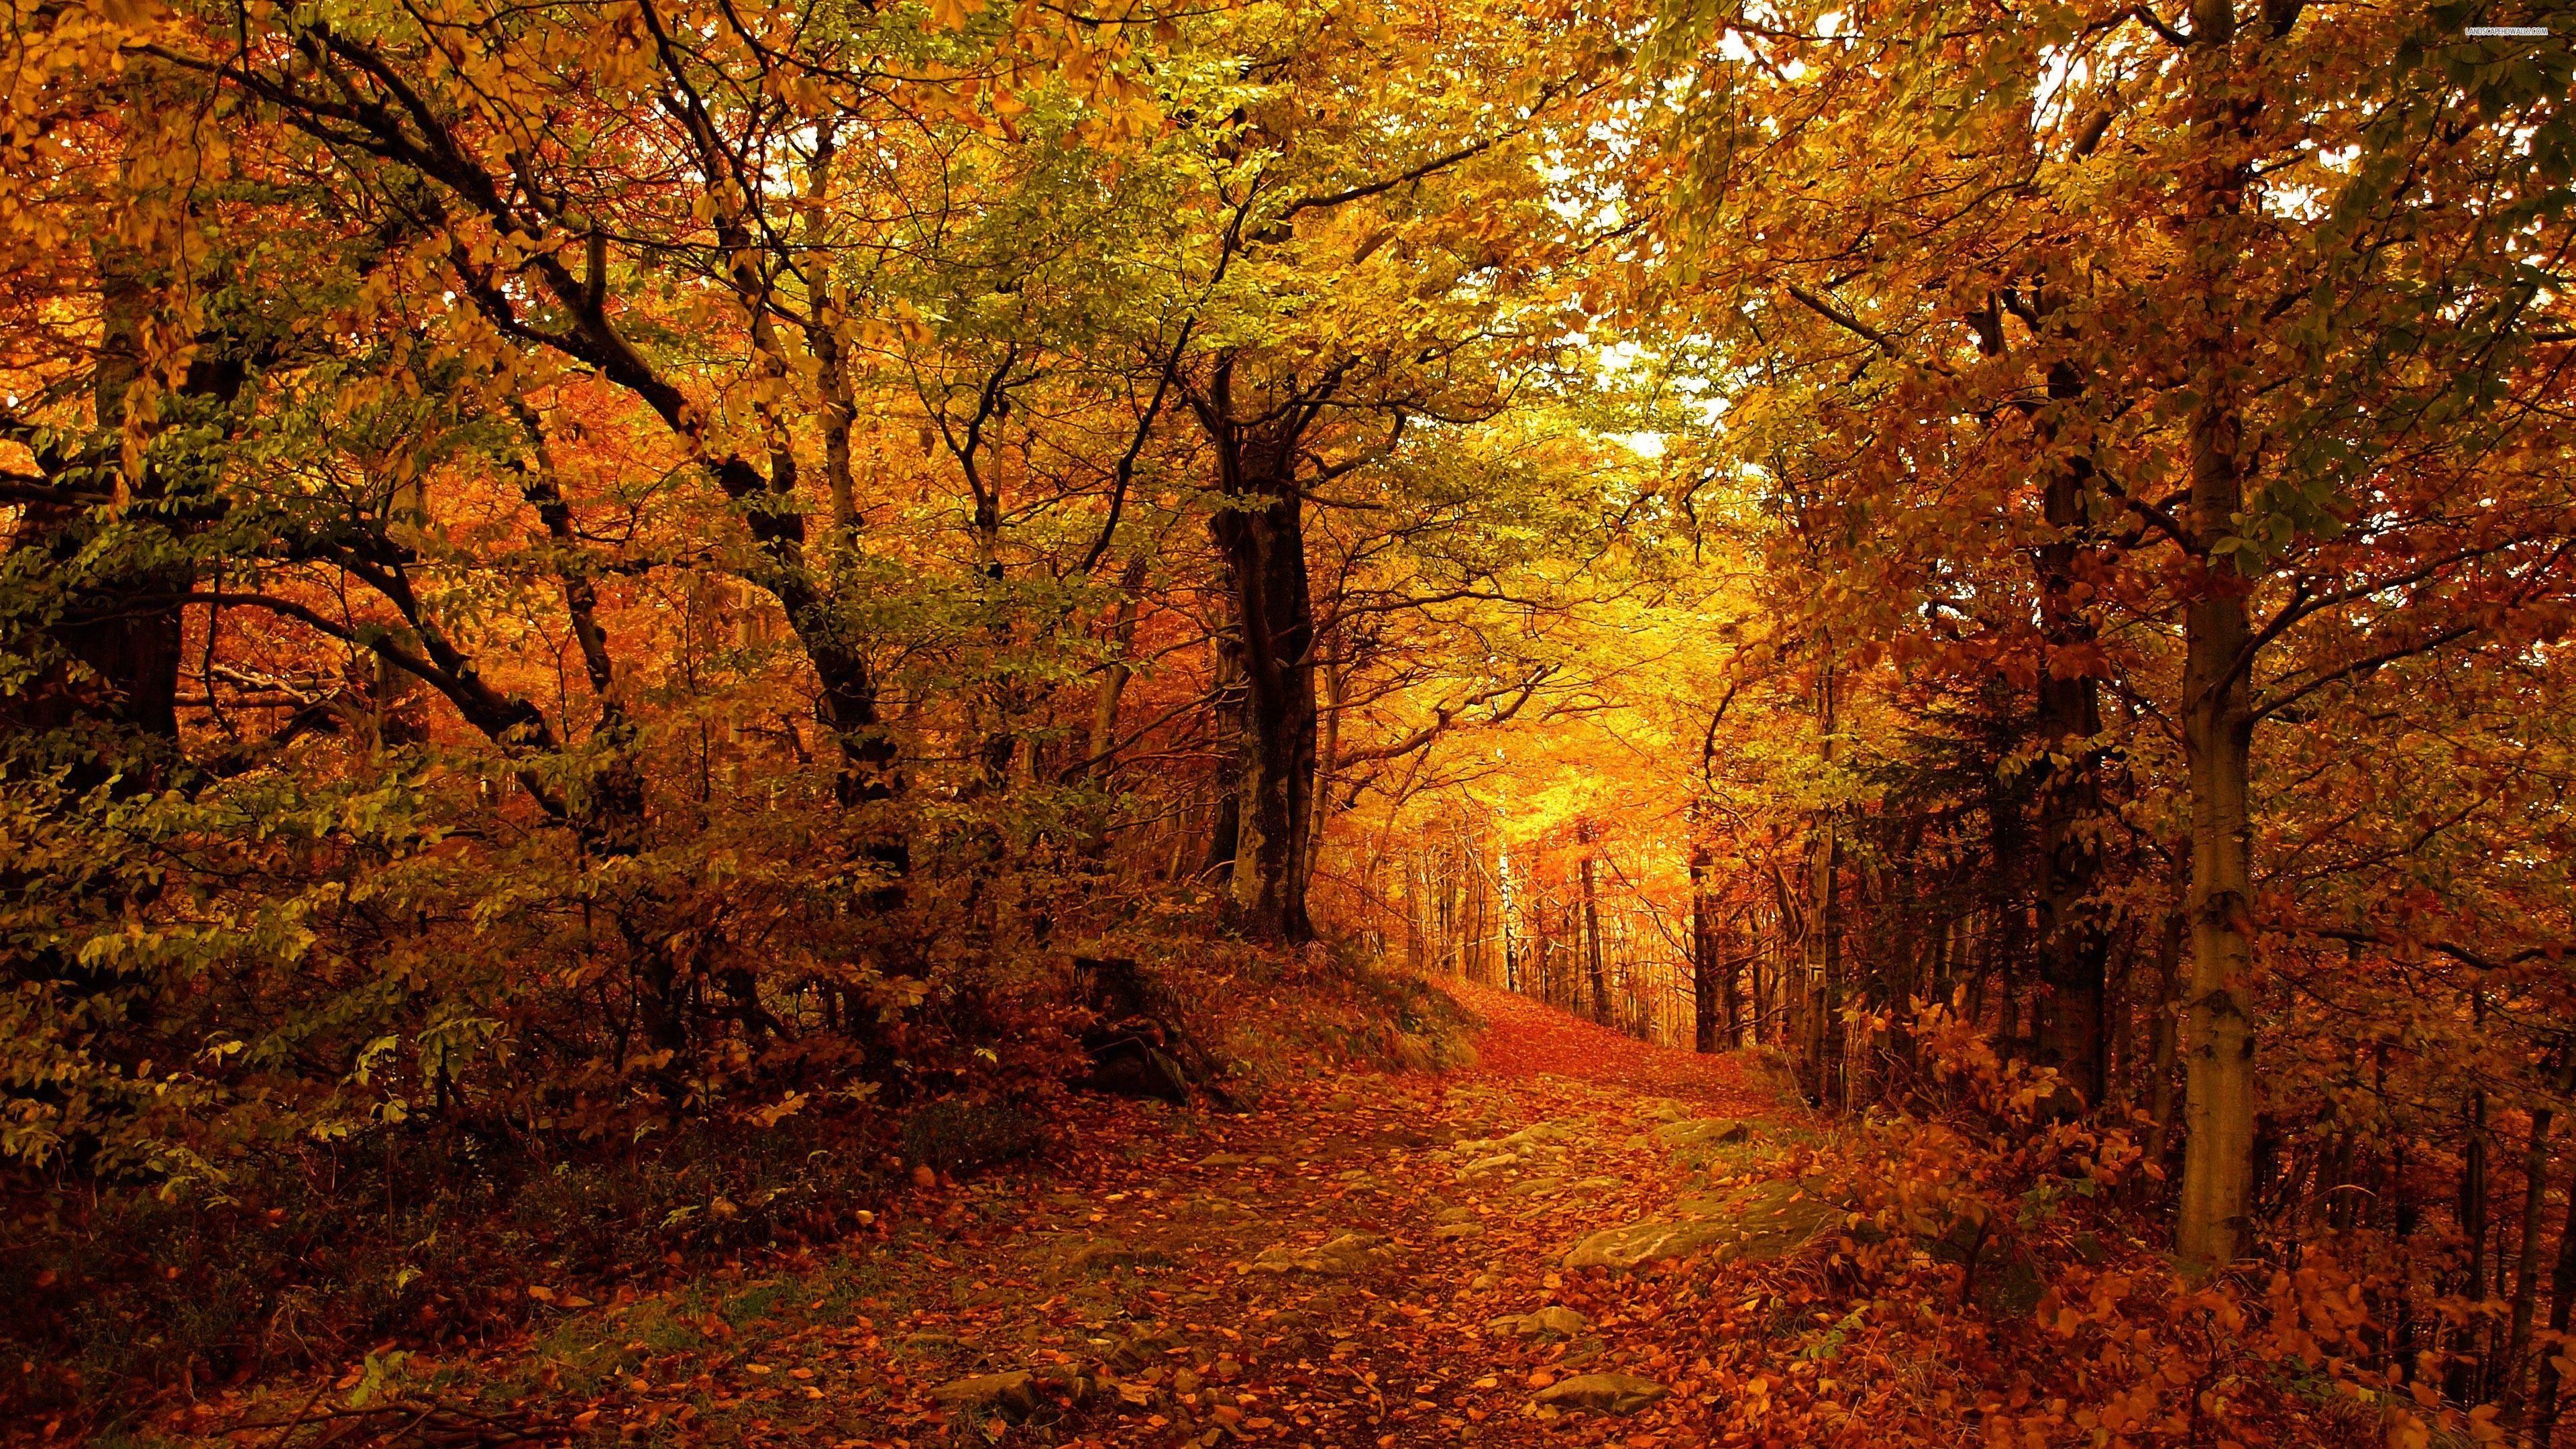 Forest path in the golden autumn wallpaper. It's FALL